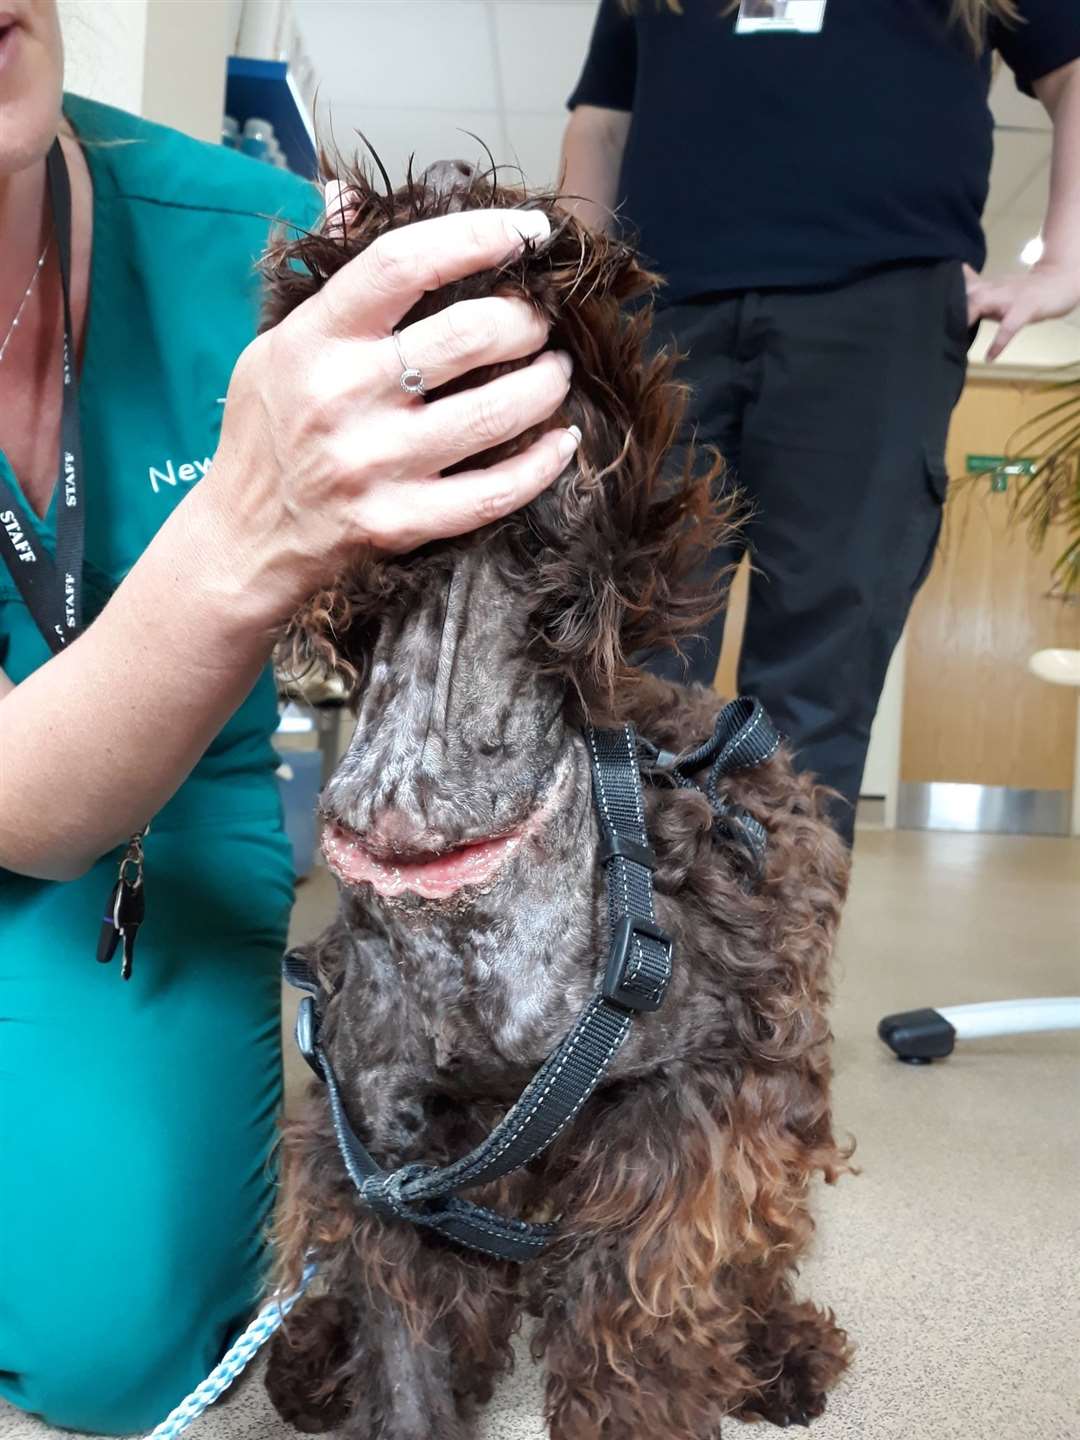 Horror wound found on abandoned dog in Lower Halstow. Picture: Swale council (11736115)